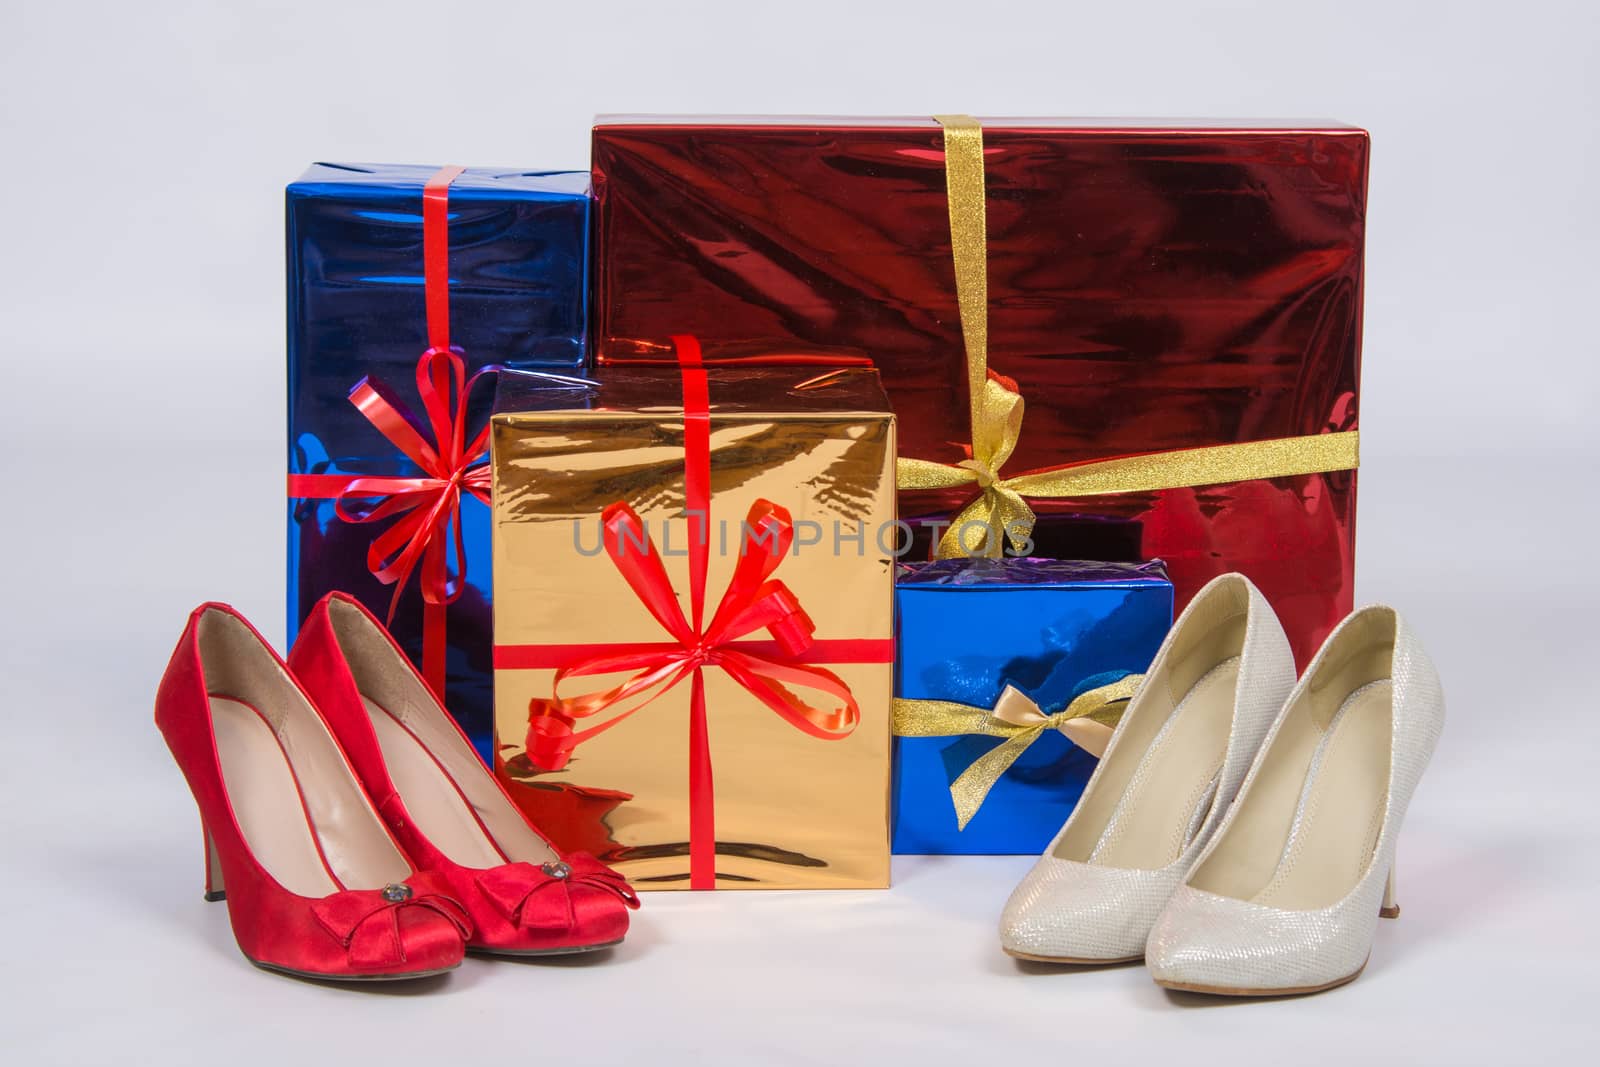 Red and white female shoes with high heels, standing near boxes with gifts by Madhourse